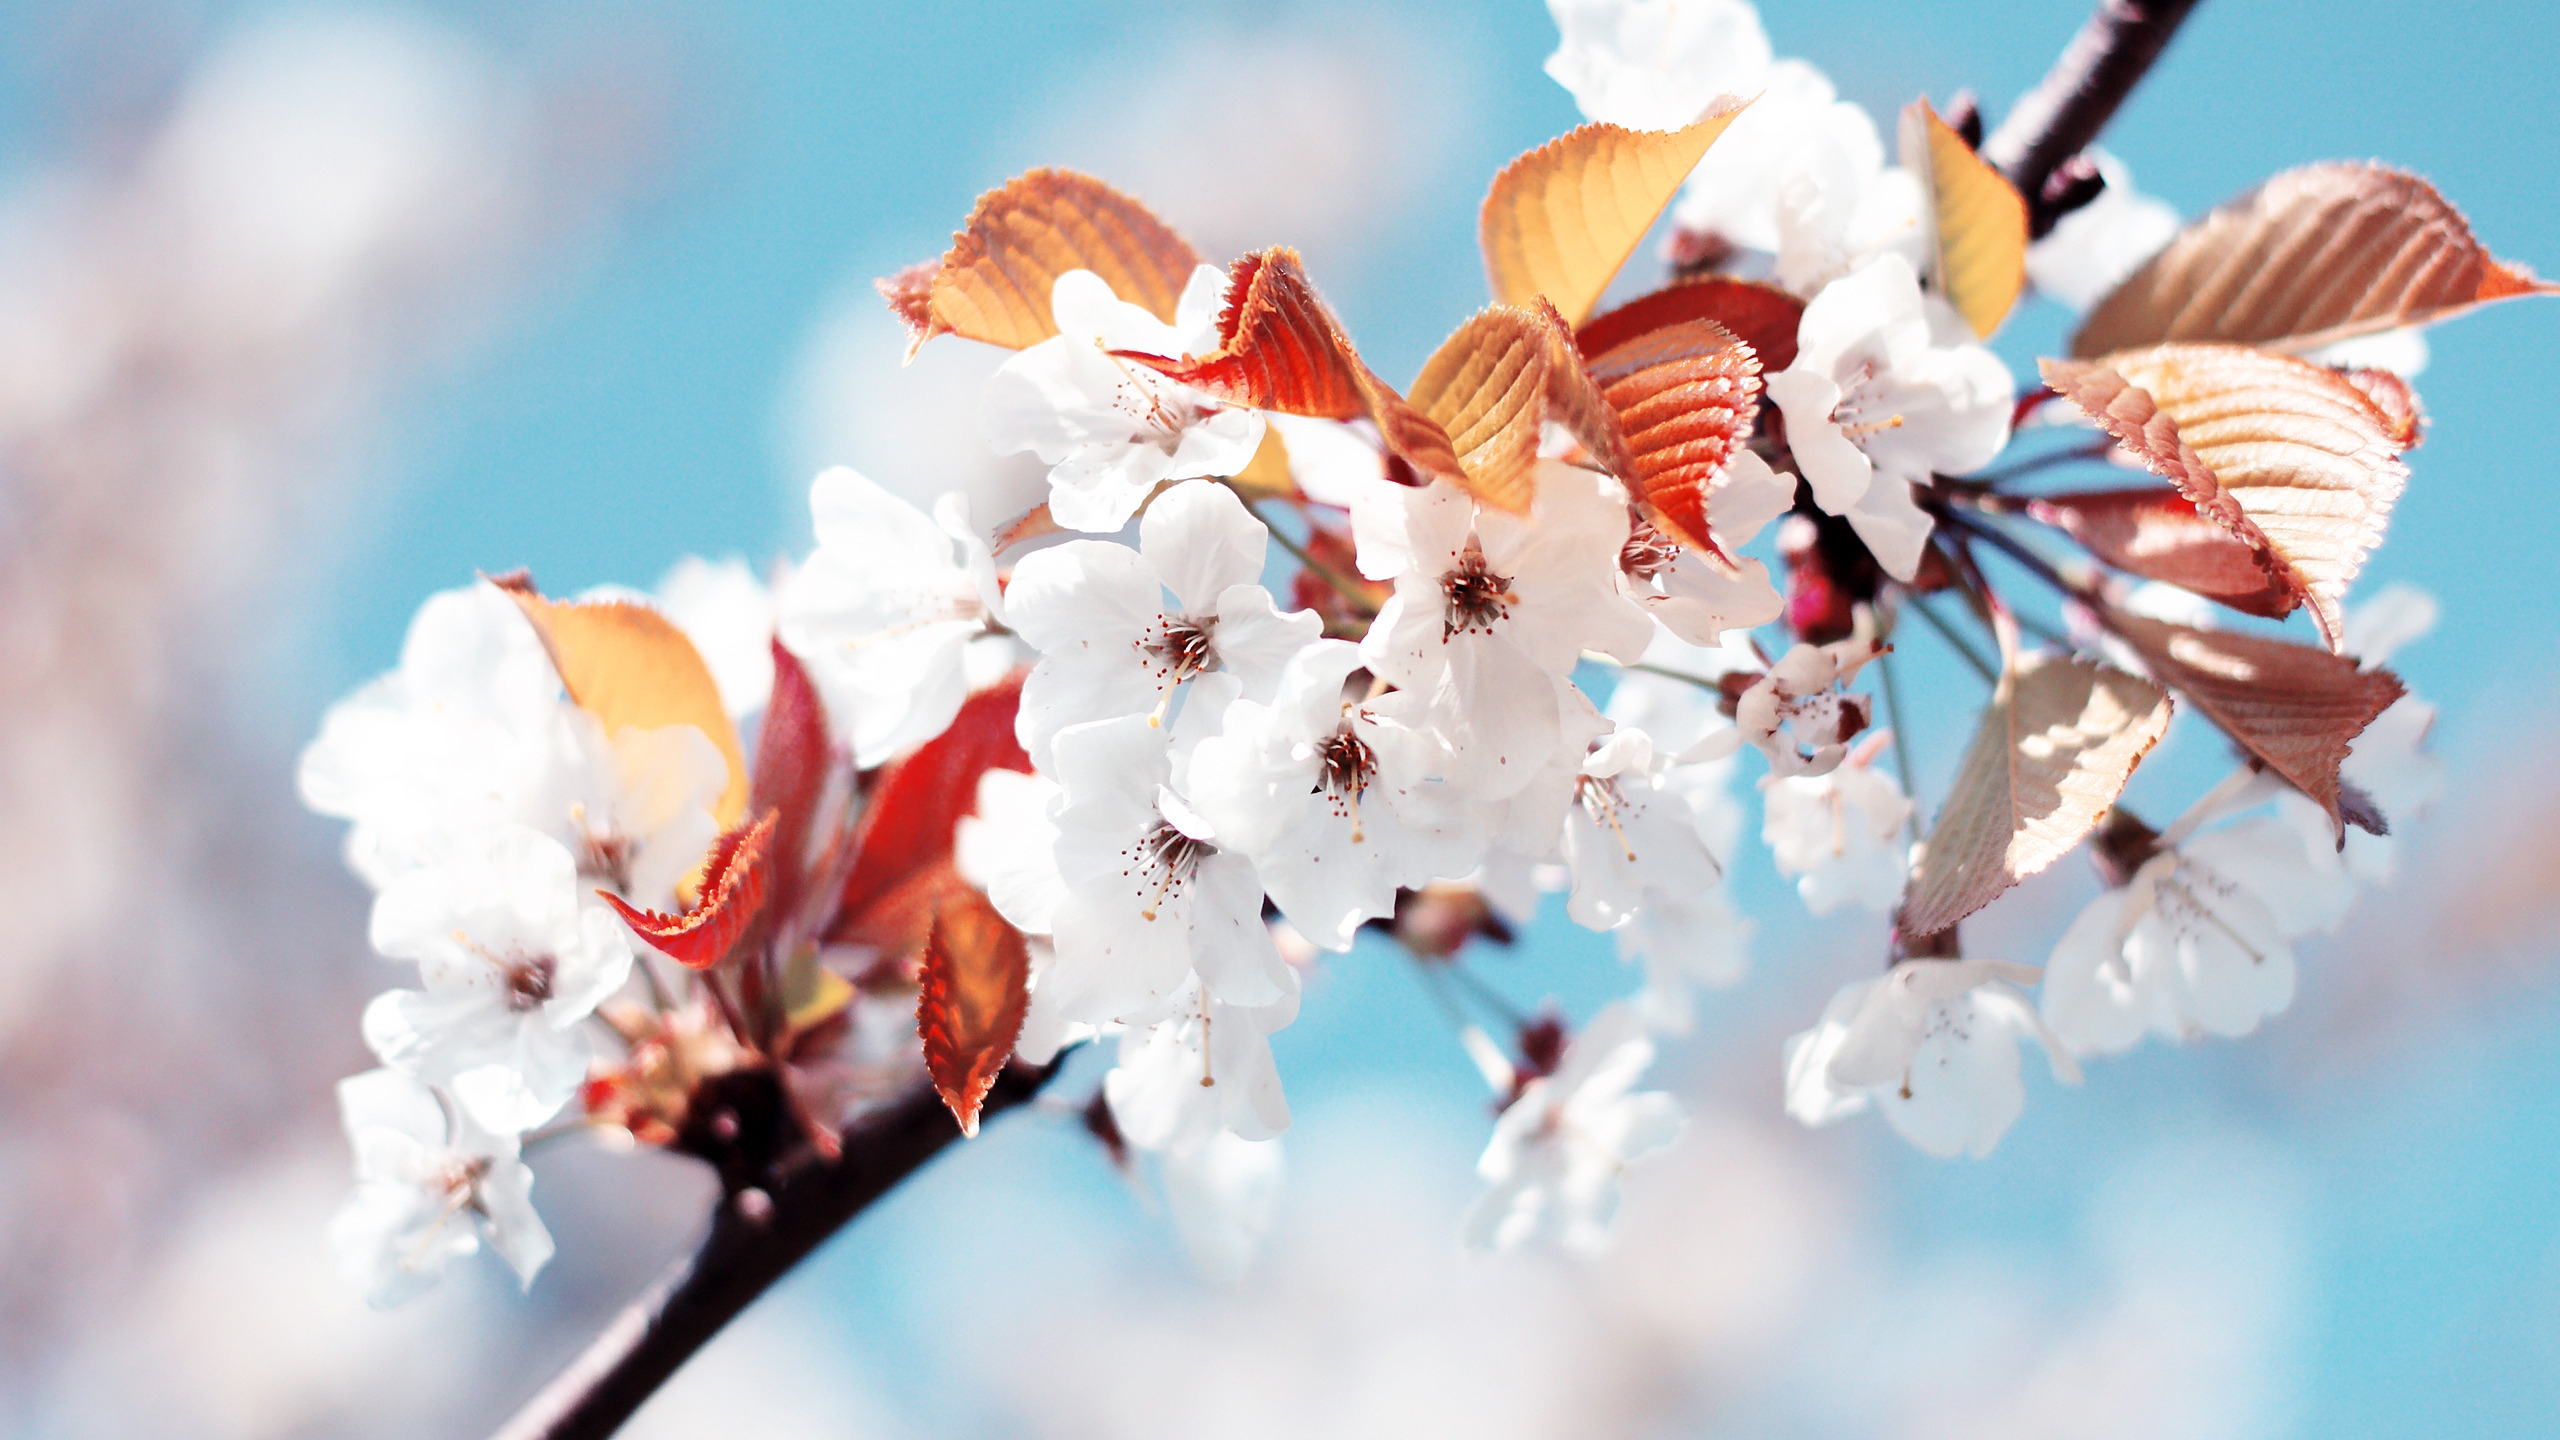 Amazing Cherry Flowers for 2560x1440 HDTV resolution